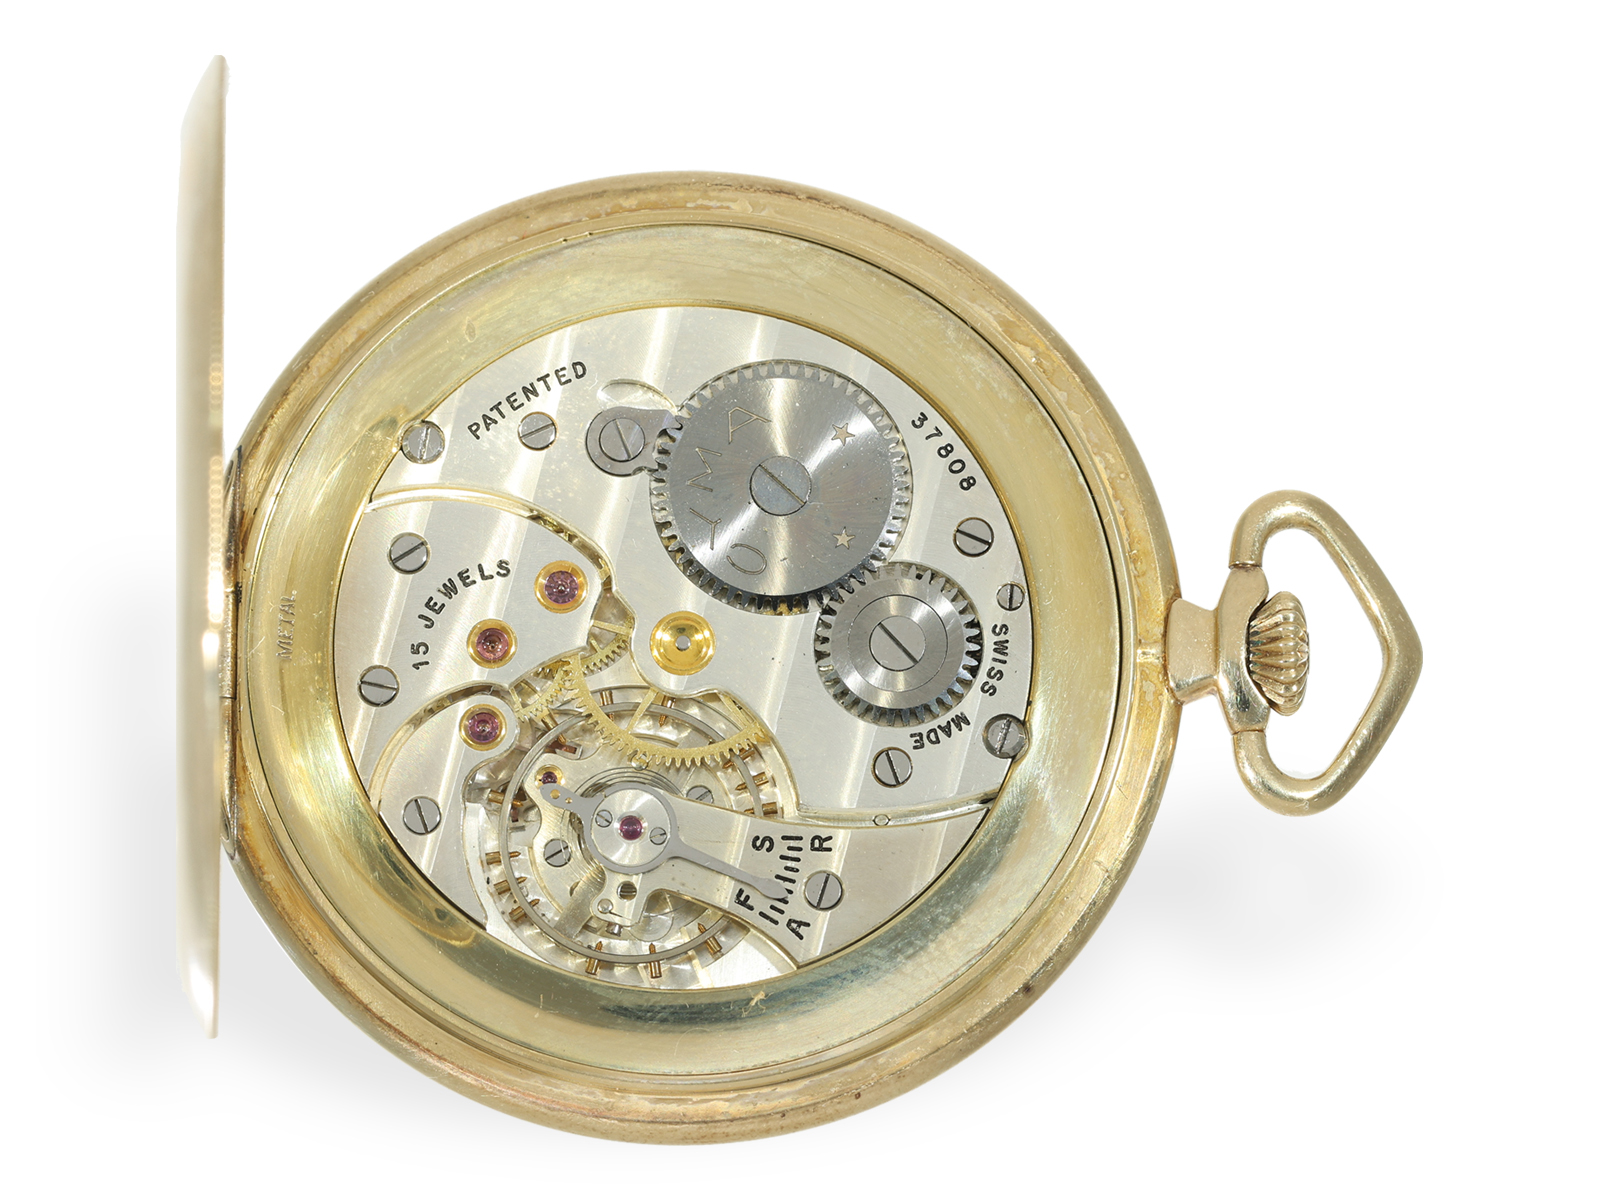 Pocket watch: Art Deco dress watch in almost like new condition with gold watch chain, around 1930 - Image 3 of 7